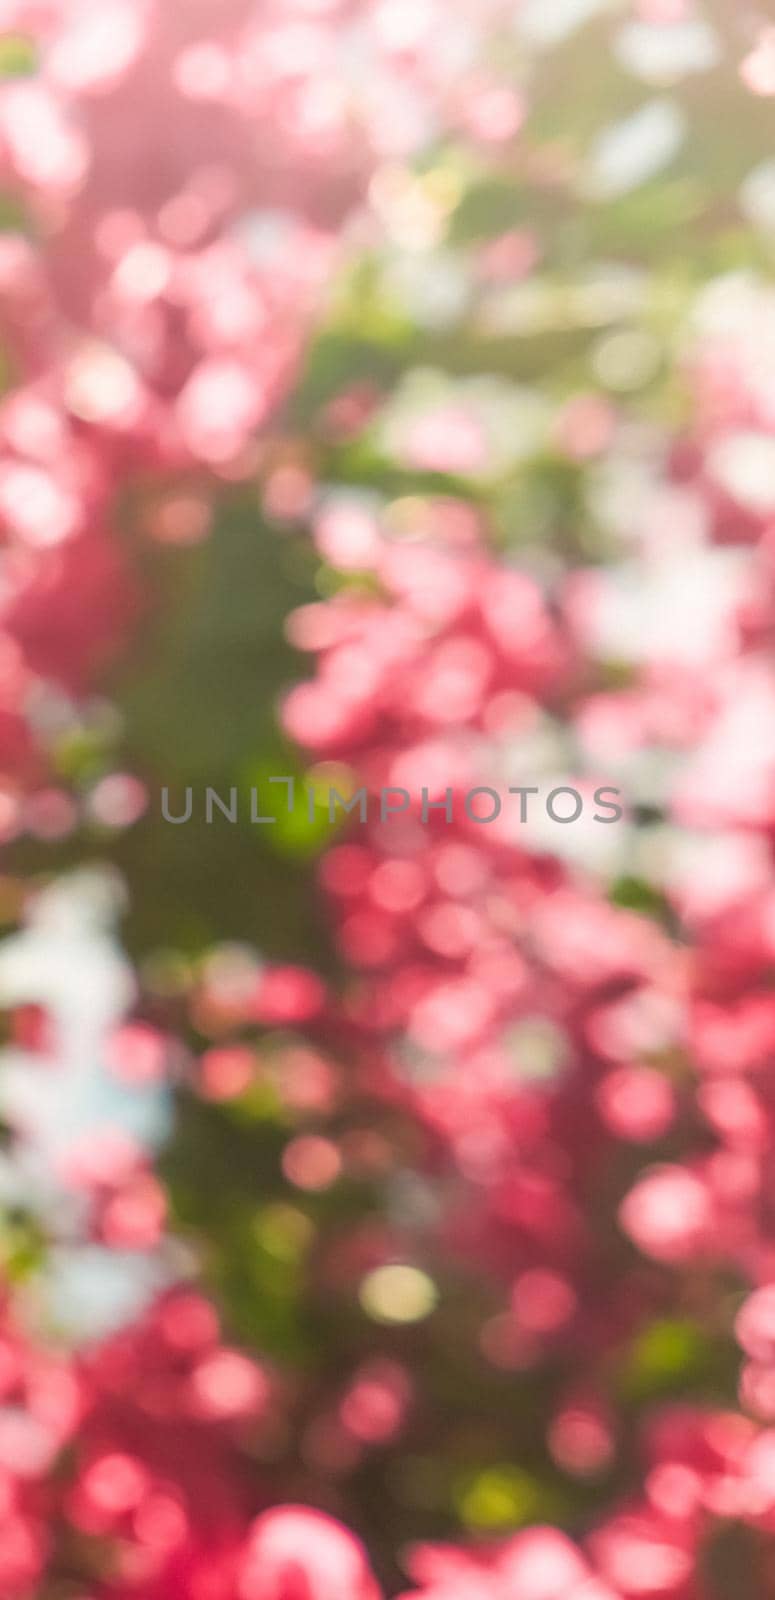 Floral background, spring nature and botanical beauty concept - Coral blooming flowers and blue sky, feminine style background